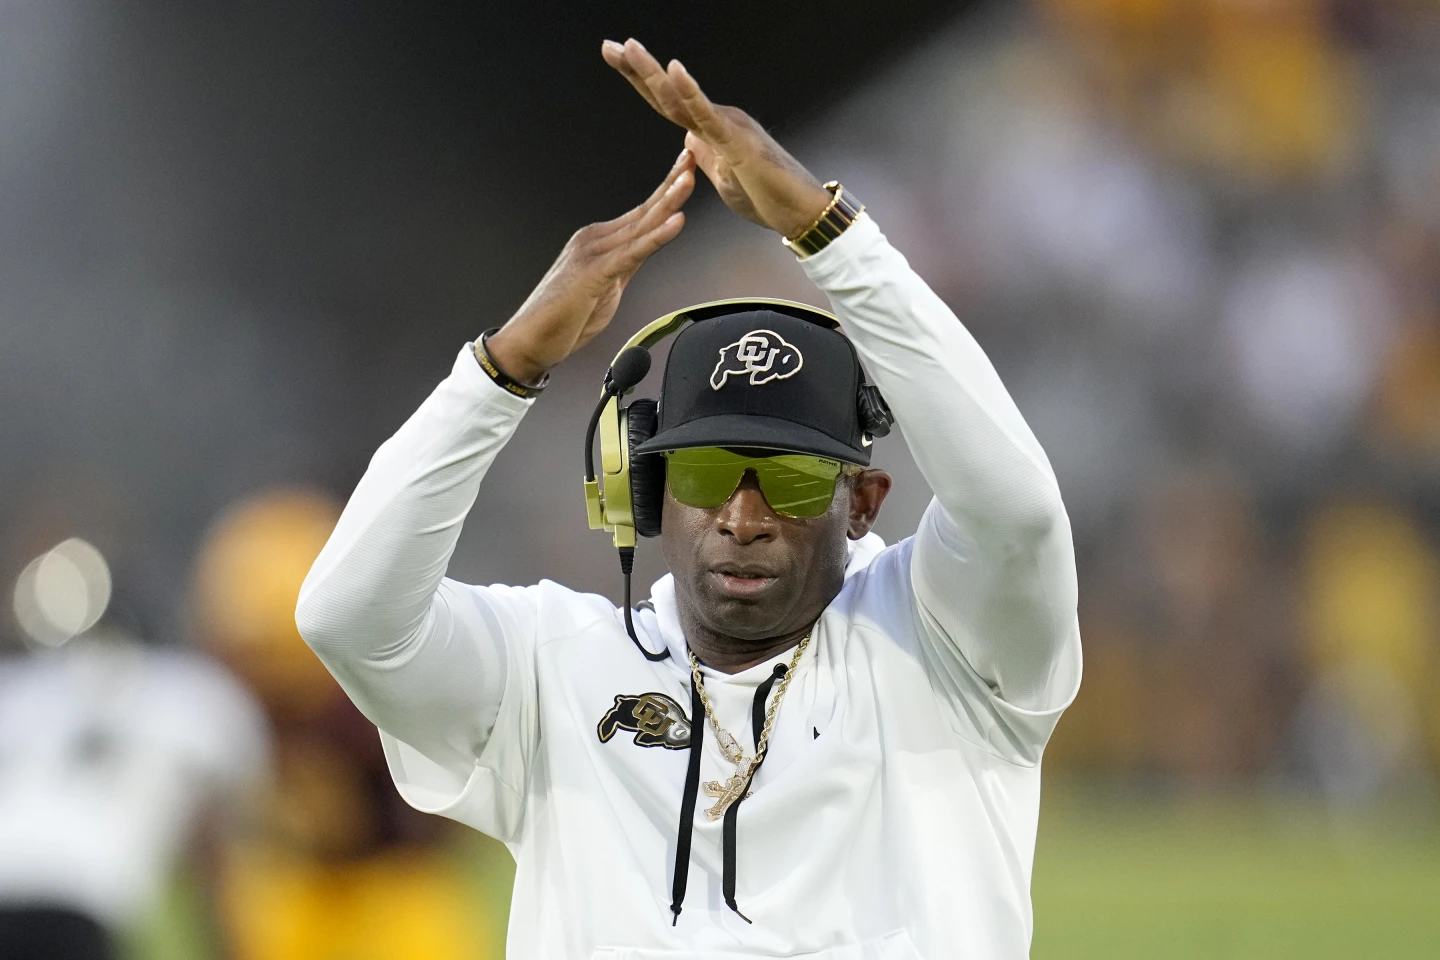 Colorado head coach Deion Sanders on the field during his team’s game against Arizona State. Photo taken from Associated Press.